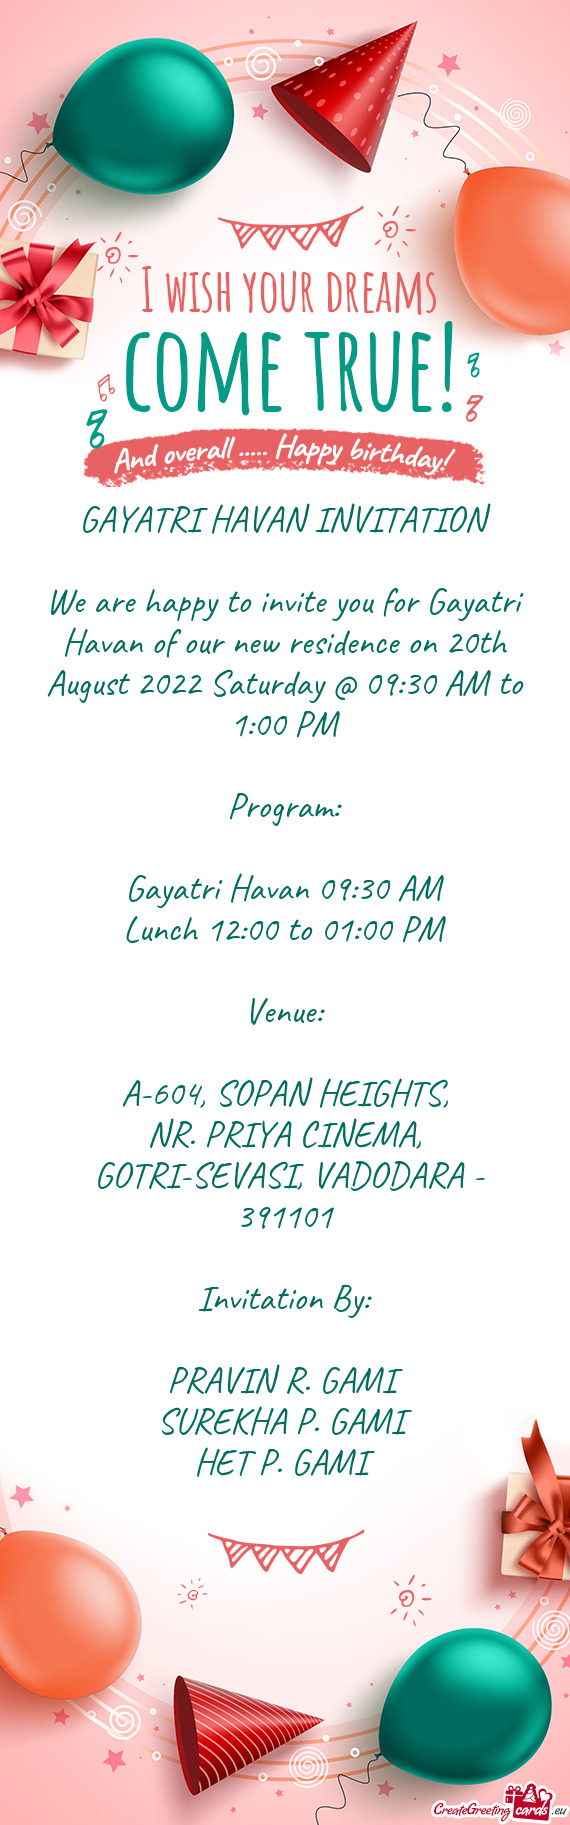 We are happy to invite you for Gayatri Havan of our new residence on 20th August 2022 Saturday @ 09